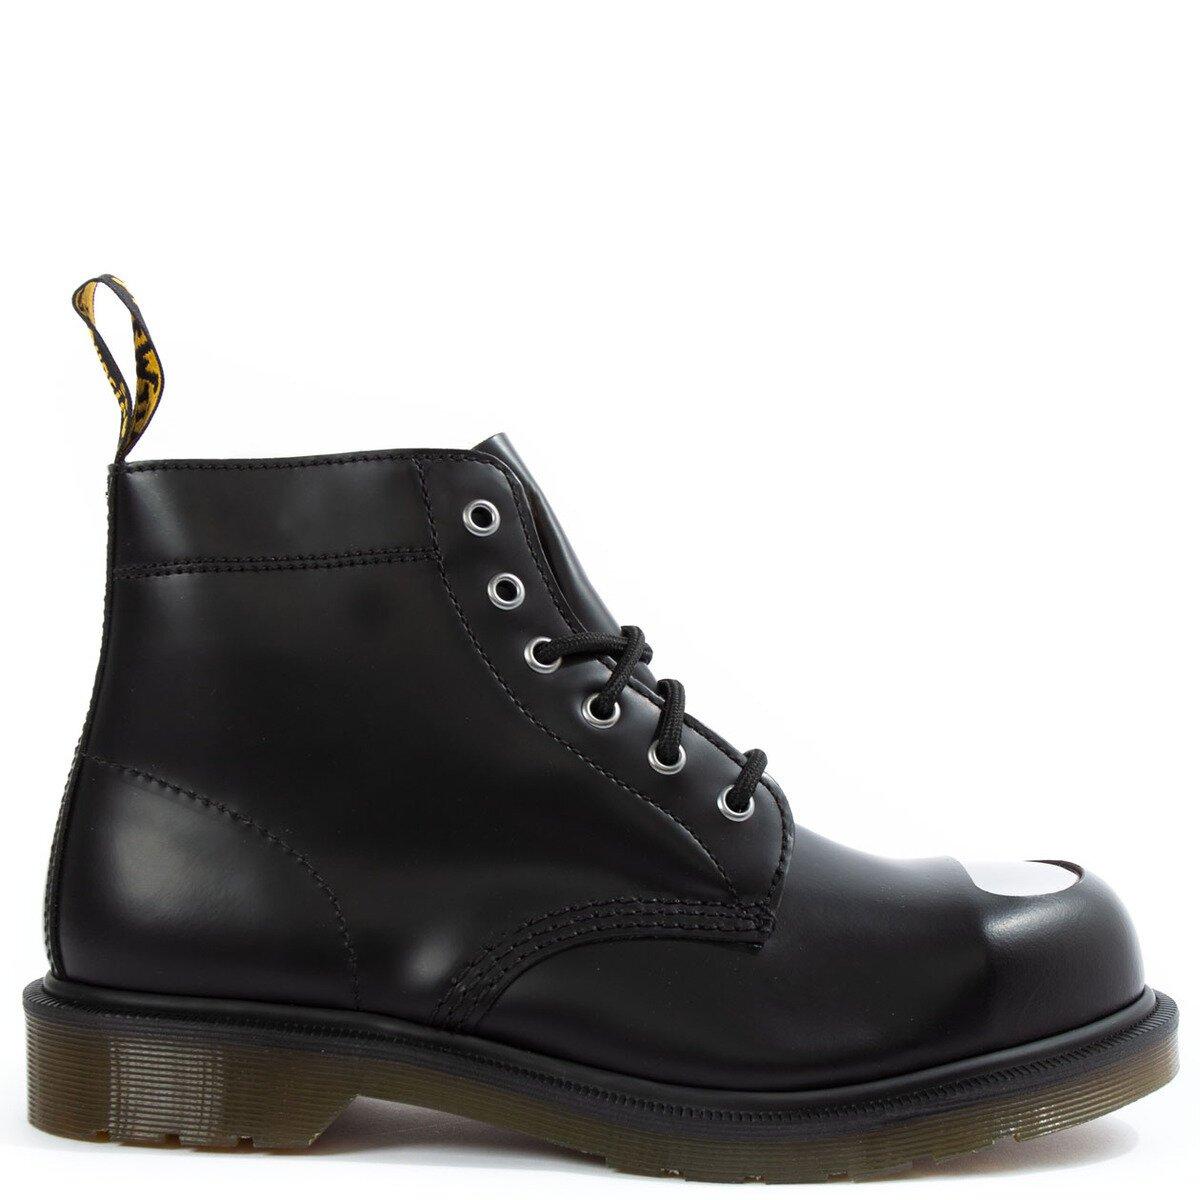 Dr. Martens 101 Exposed Steel Toe Leather Boots In Black | Lyst Australia